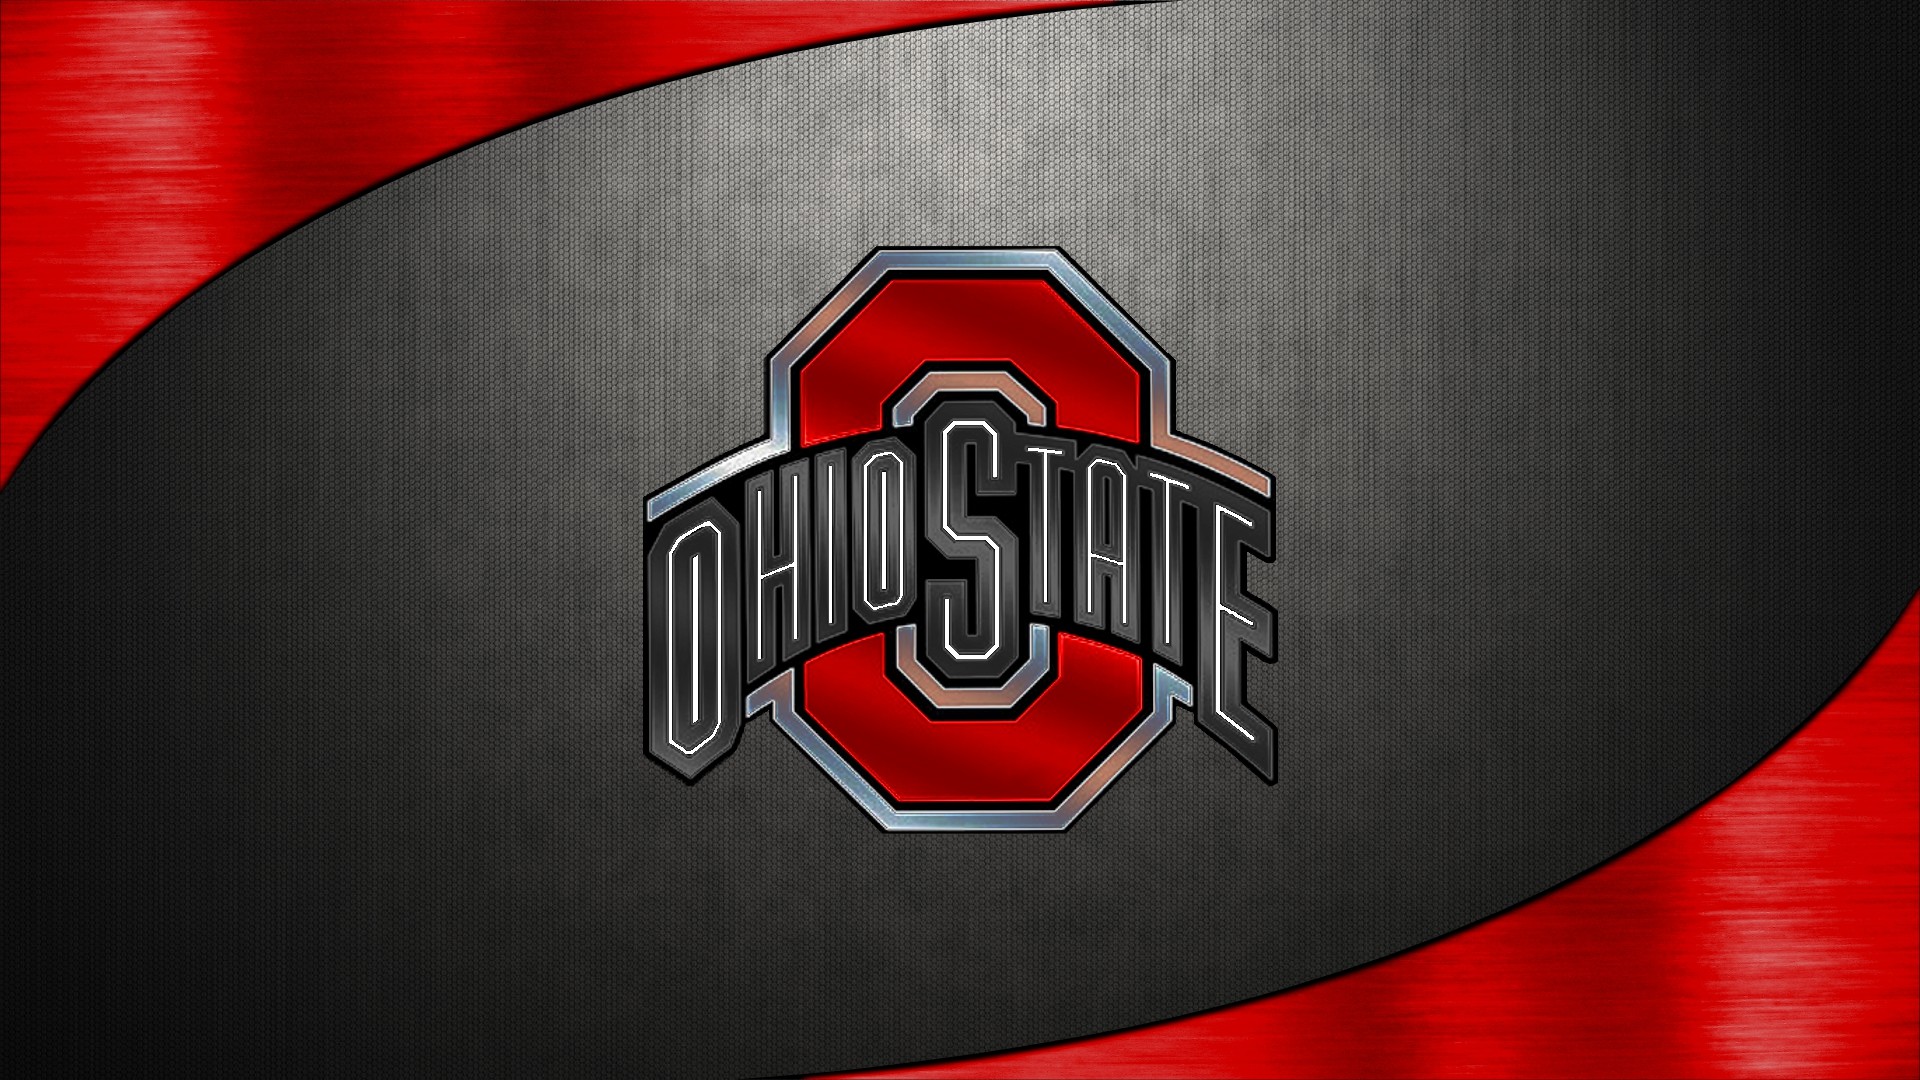 Free Download College Football Iphone Wallpaper Movies - Ohio State Background Hd - HD Wallpaper 